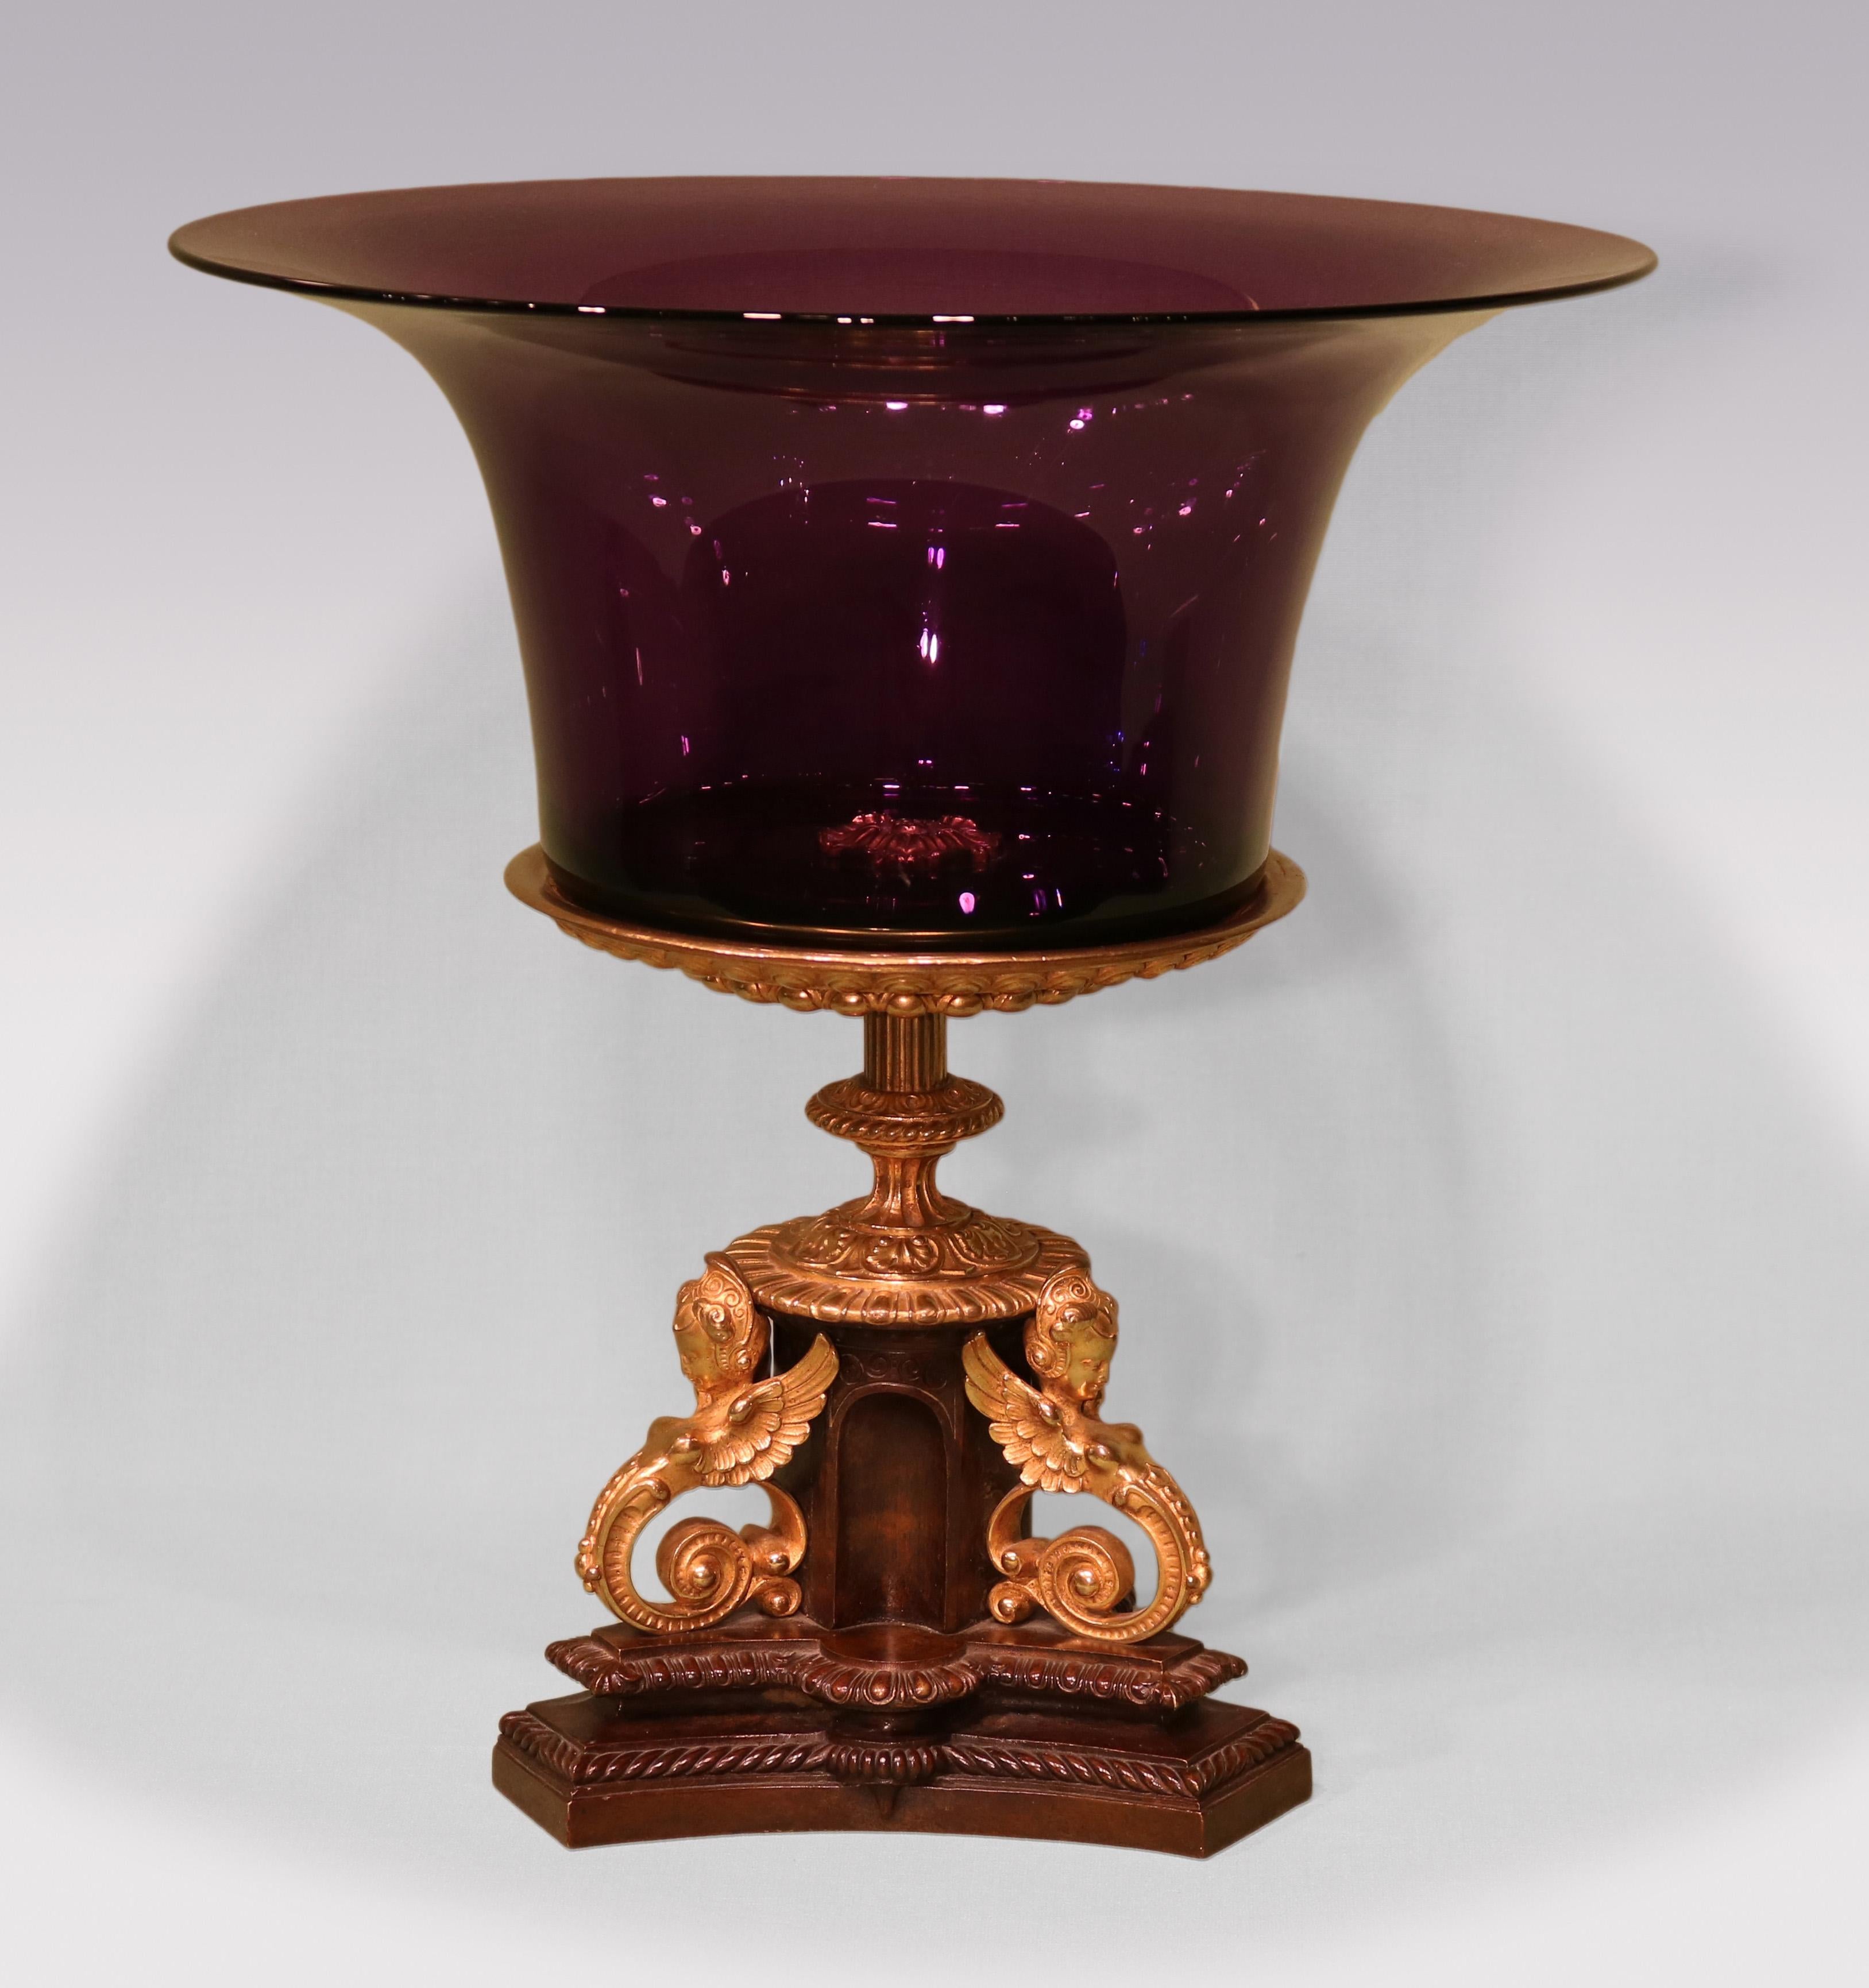 A pair of mid-19th Century Bronze & ormolu Tazzas, with amethyst glass bowls above triform bases with winged classical ladies raised on gadrooned double stepped concave bases.

Width and Depth of bases: 6 inches